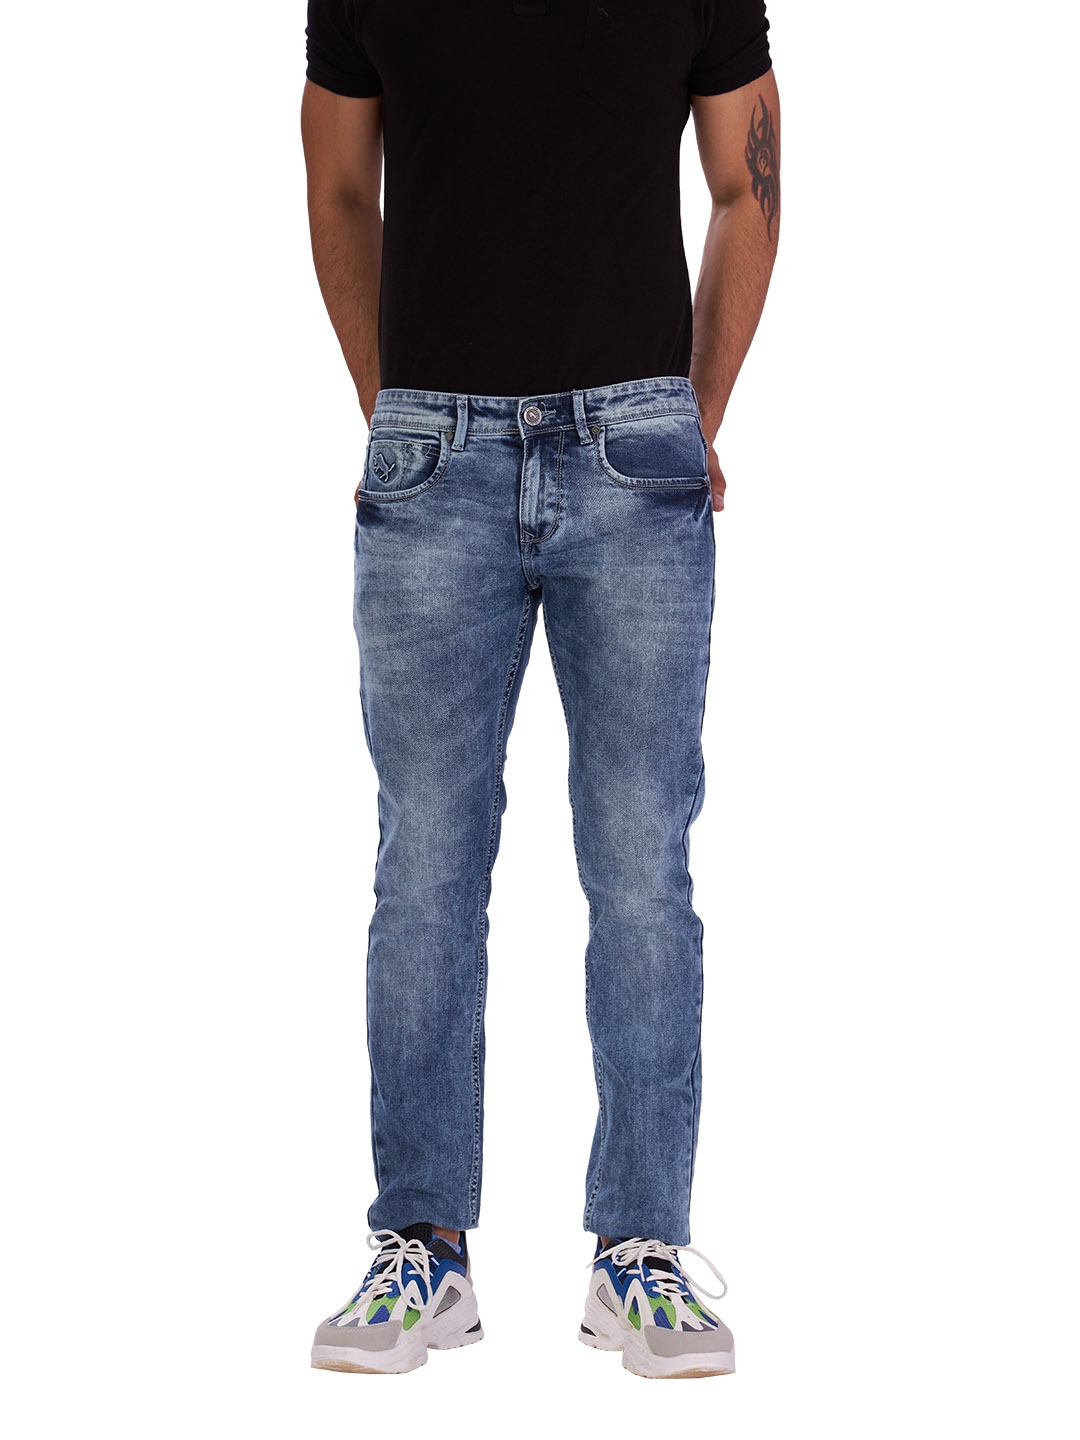 D'cot by Donear | D'cot by Donear Mens Blue Cotton Jeans